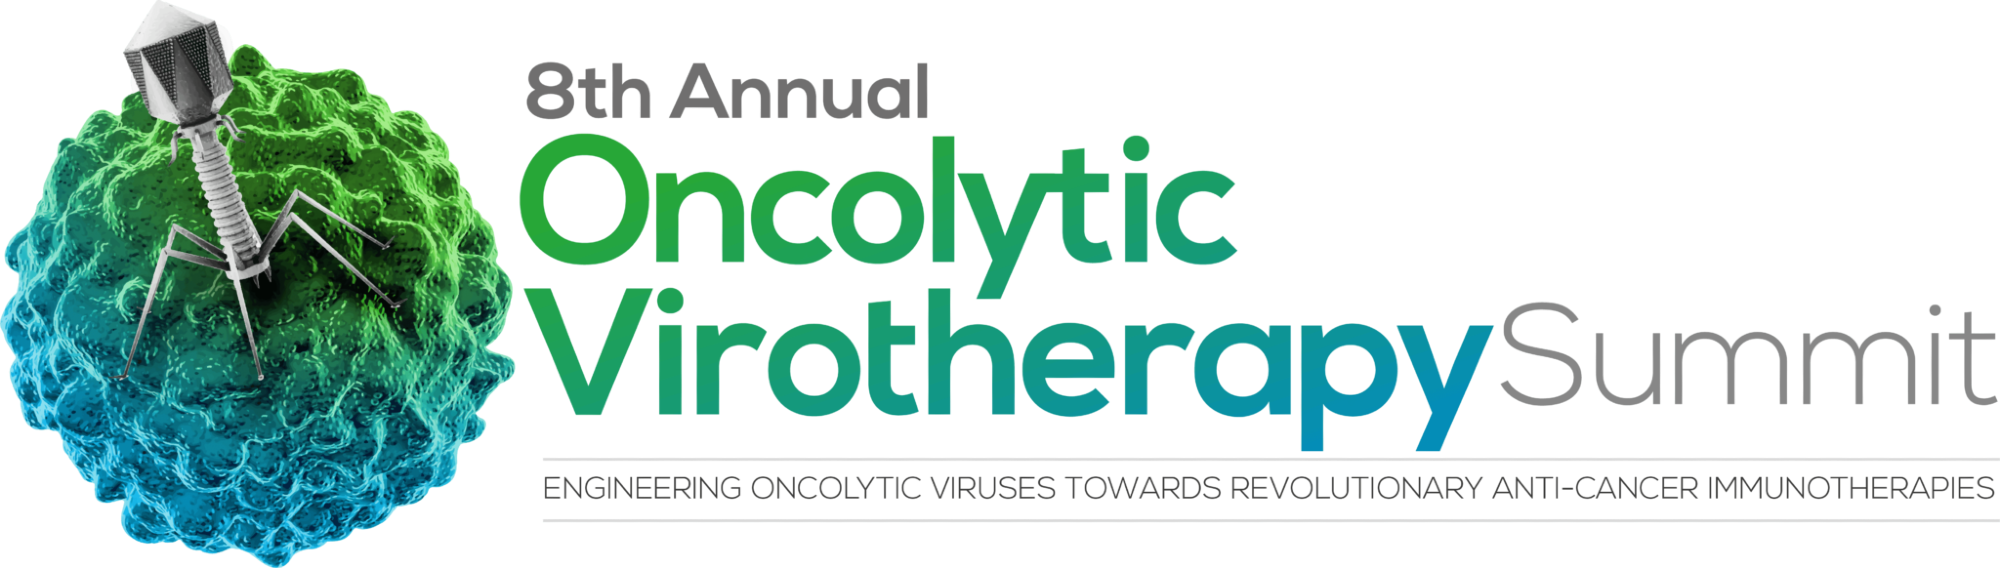 8th Oncolytic Virotherapy Summit